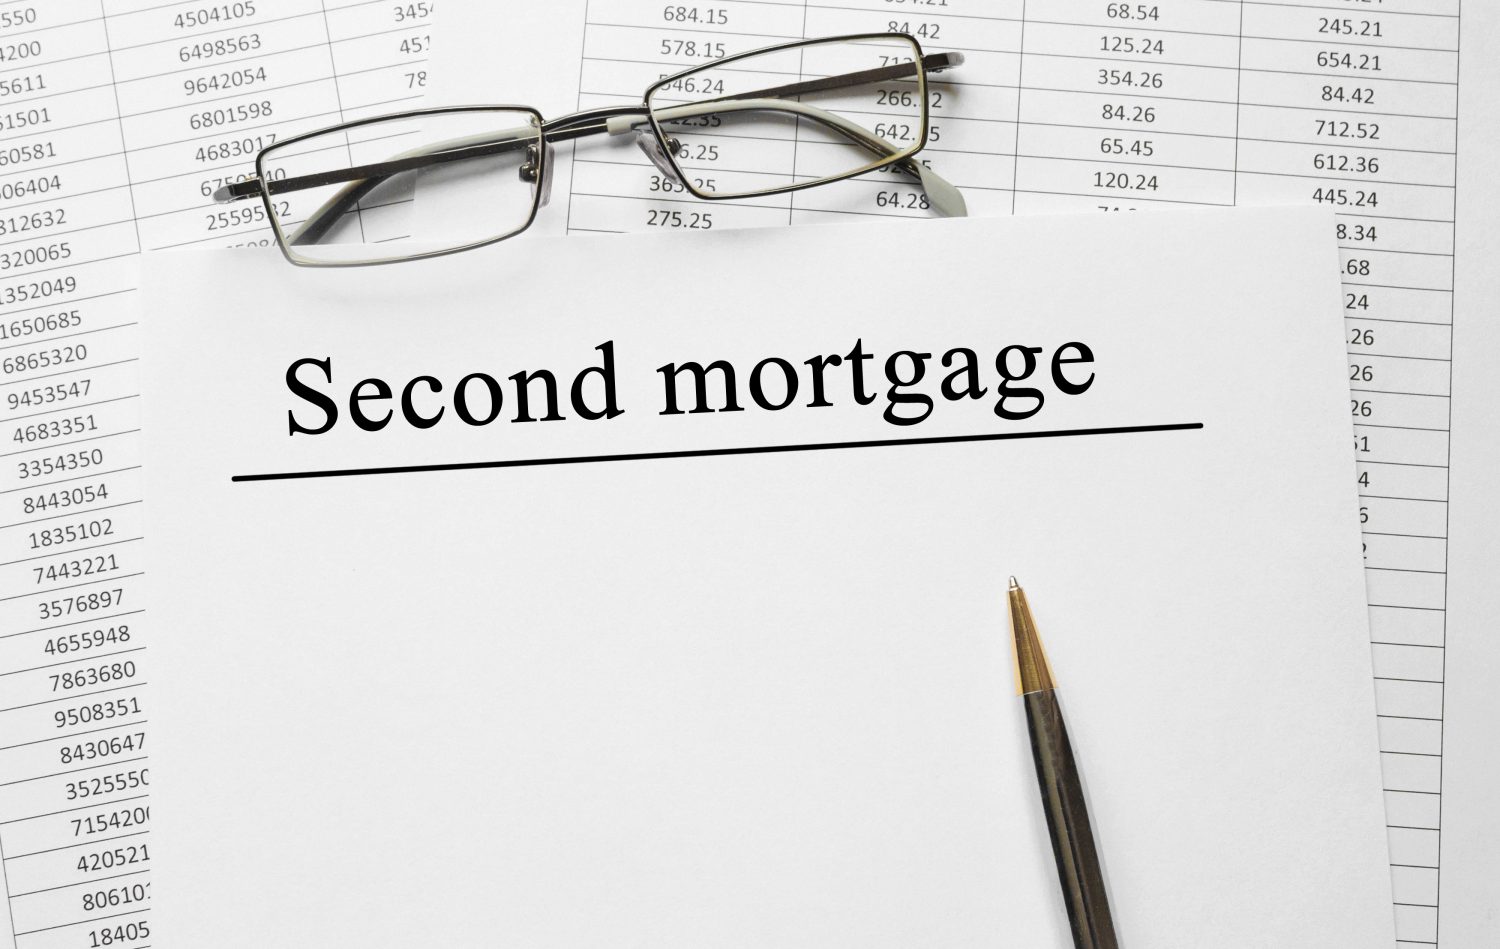 How to get a second mortgage in Toronto (Ontario)?